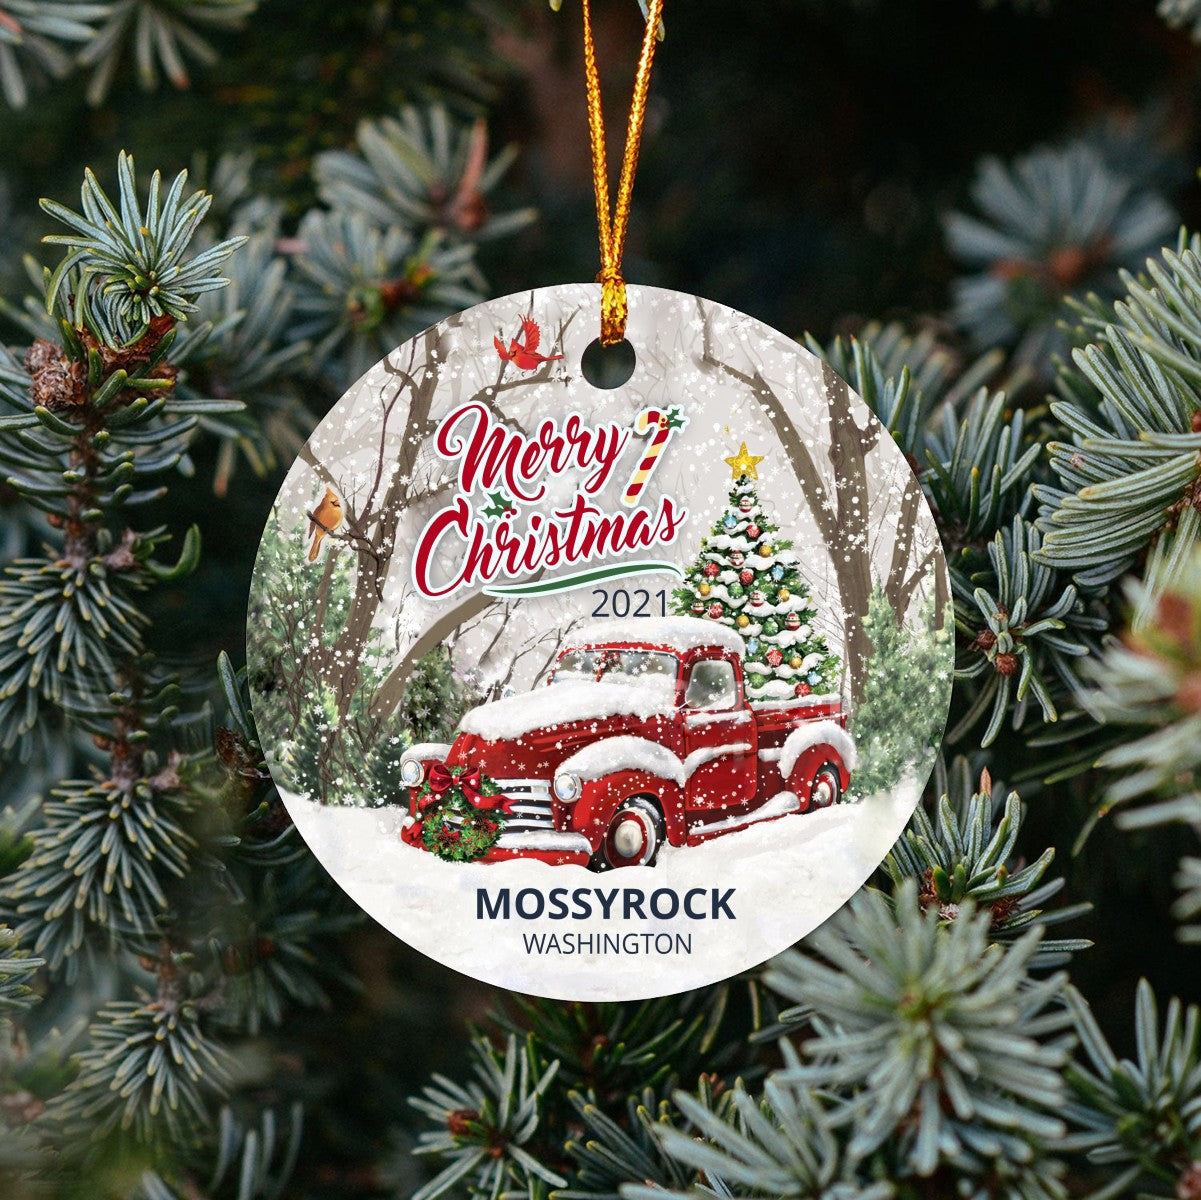 Christmas Tree Ornaments Mossyrock - Ornament With Name City, State Mossyrock Washington WA Ornament - Red Truck Xmas Ornaments 3'' Plastic Gift For Family, Friend And Housewarming